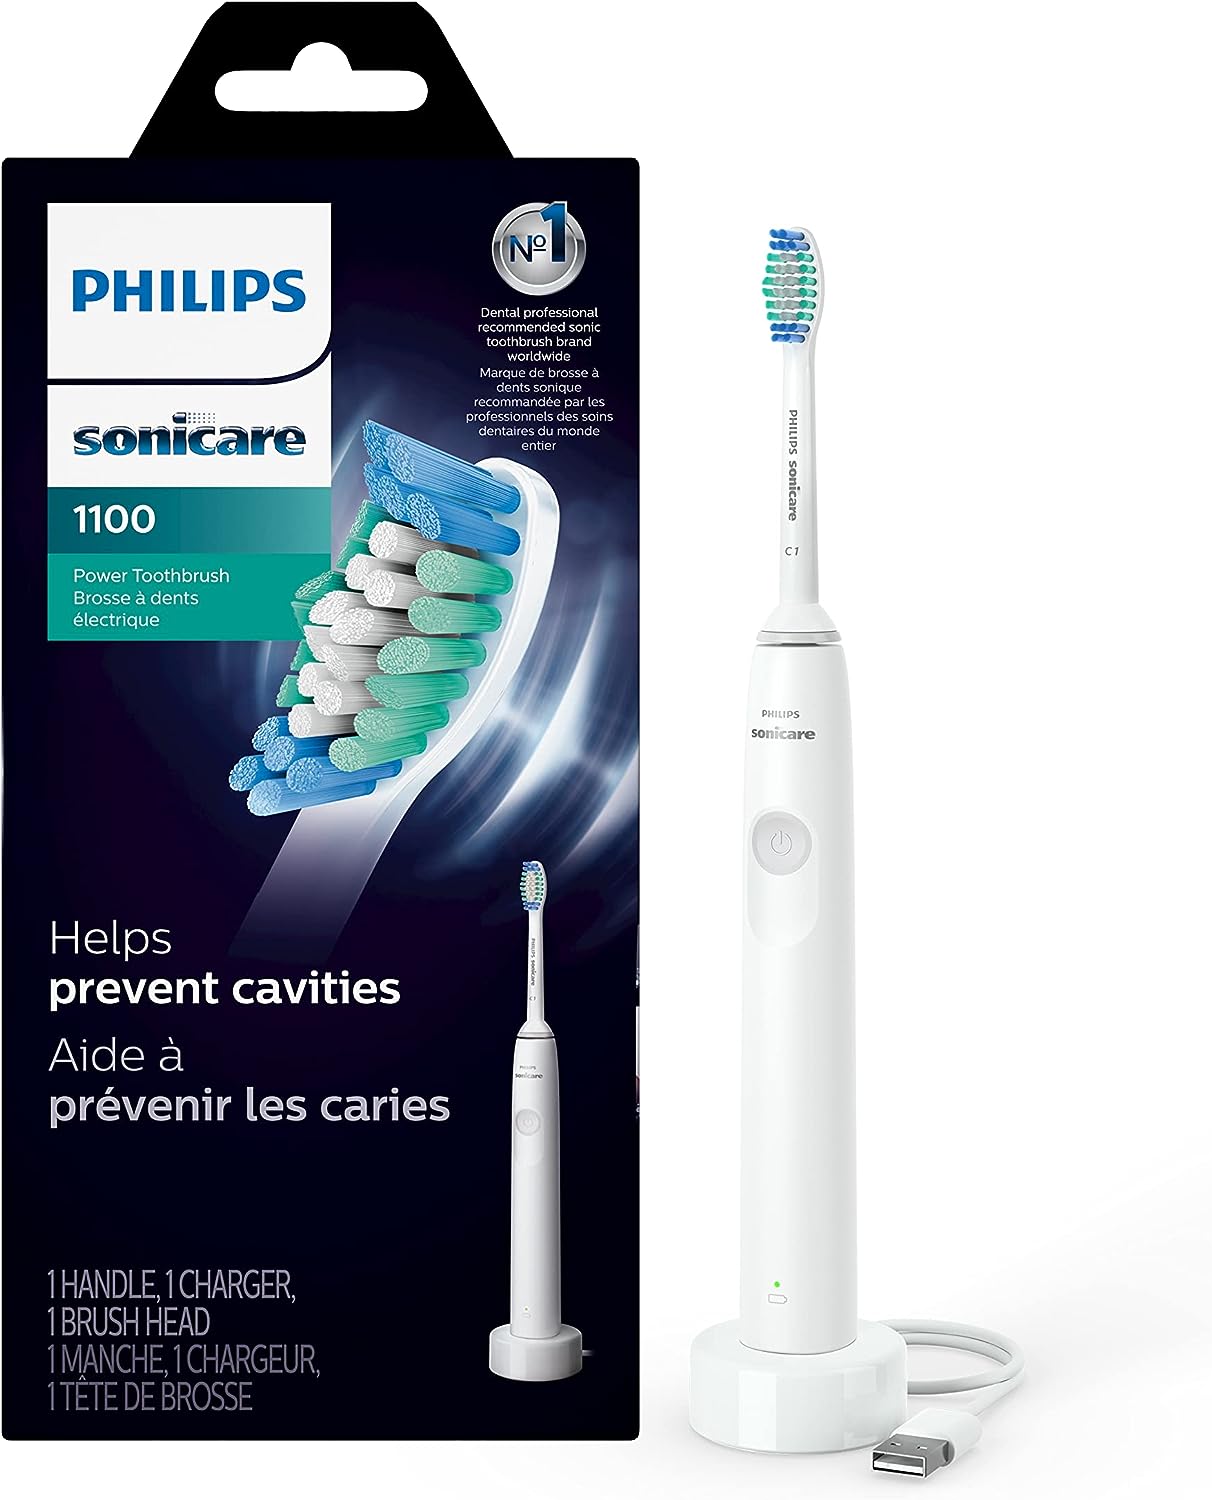 $20: PHILIPS Sonicare 1100 Rechargeable Electric Toothbrush (White Grey, HX3641/02) @ Amazon